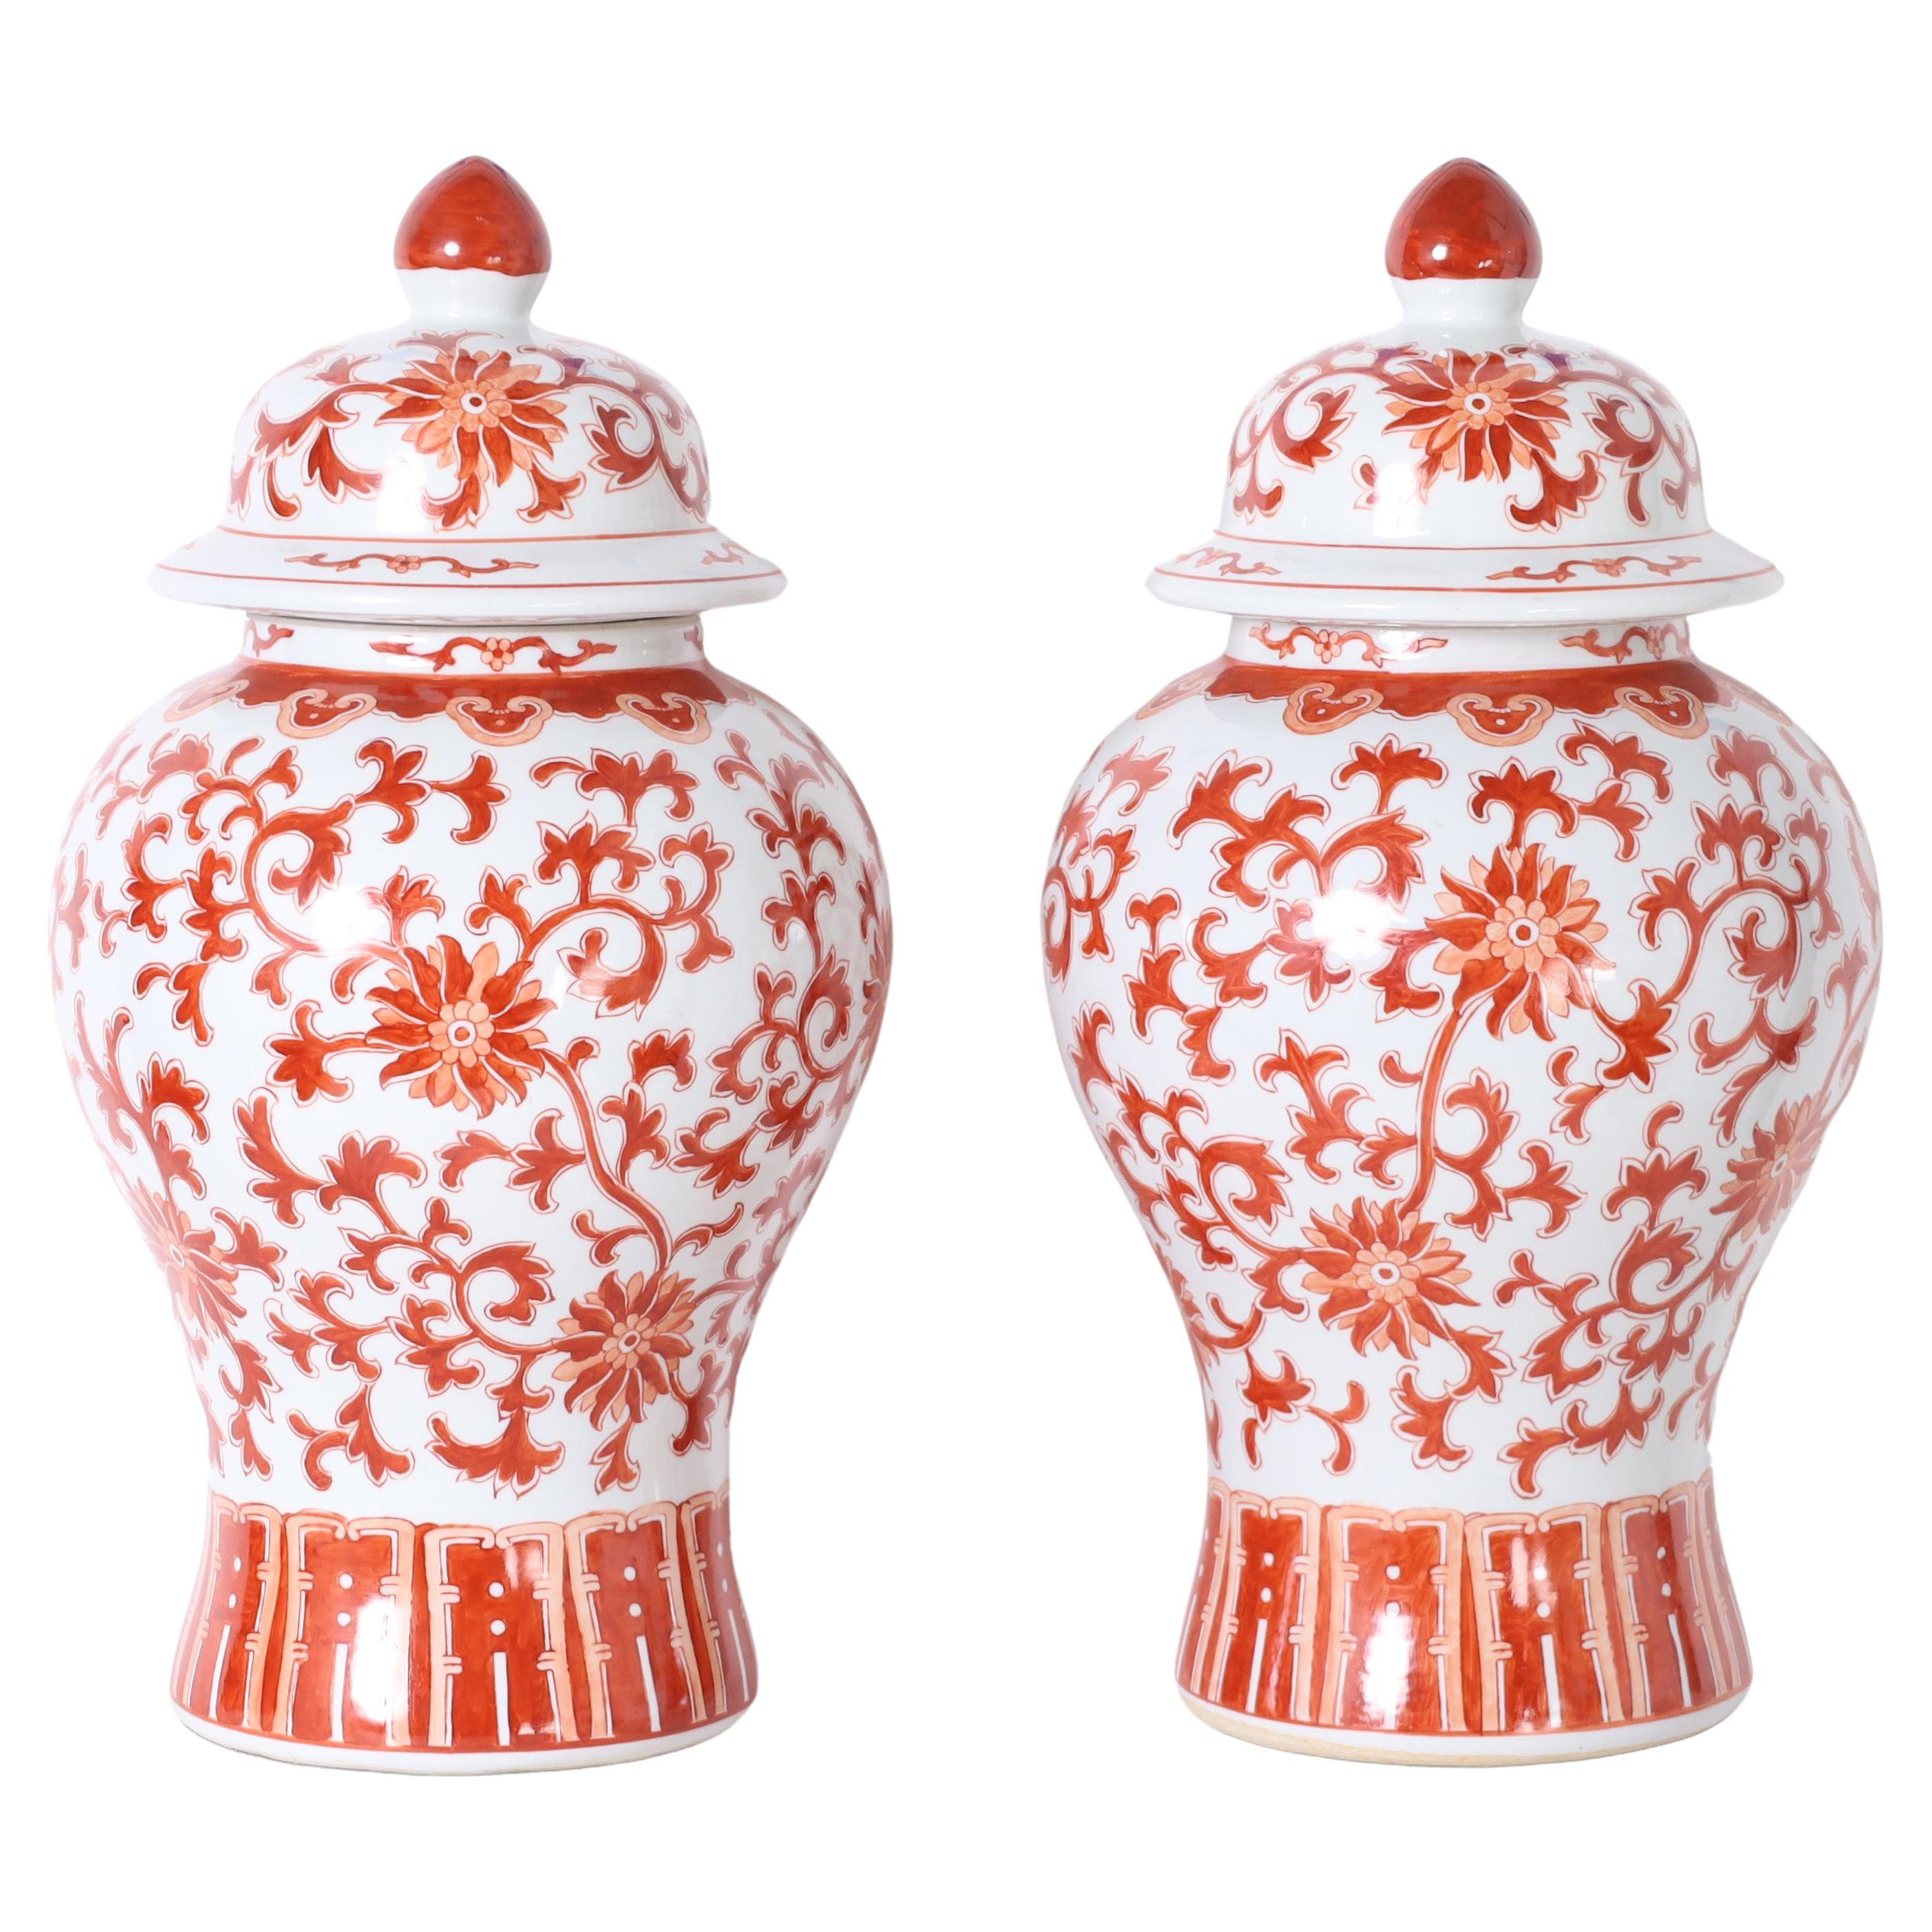 Pair of Red and White Porcelain Lidded Urns or Jars